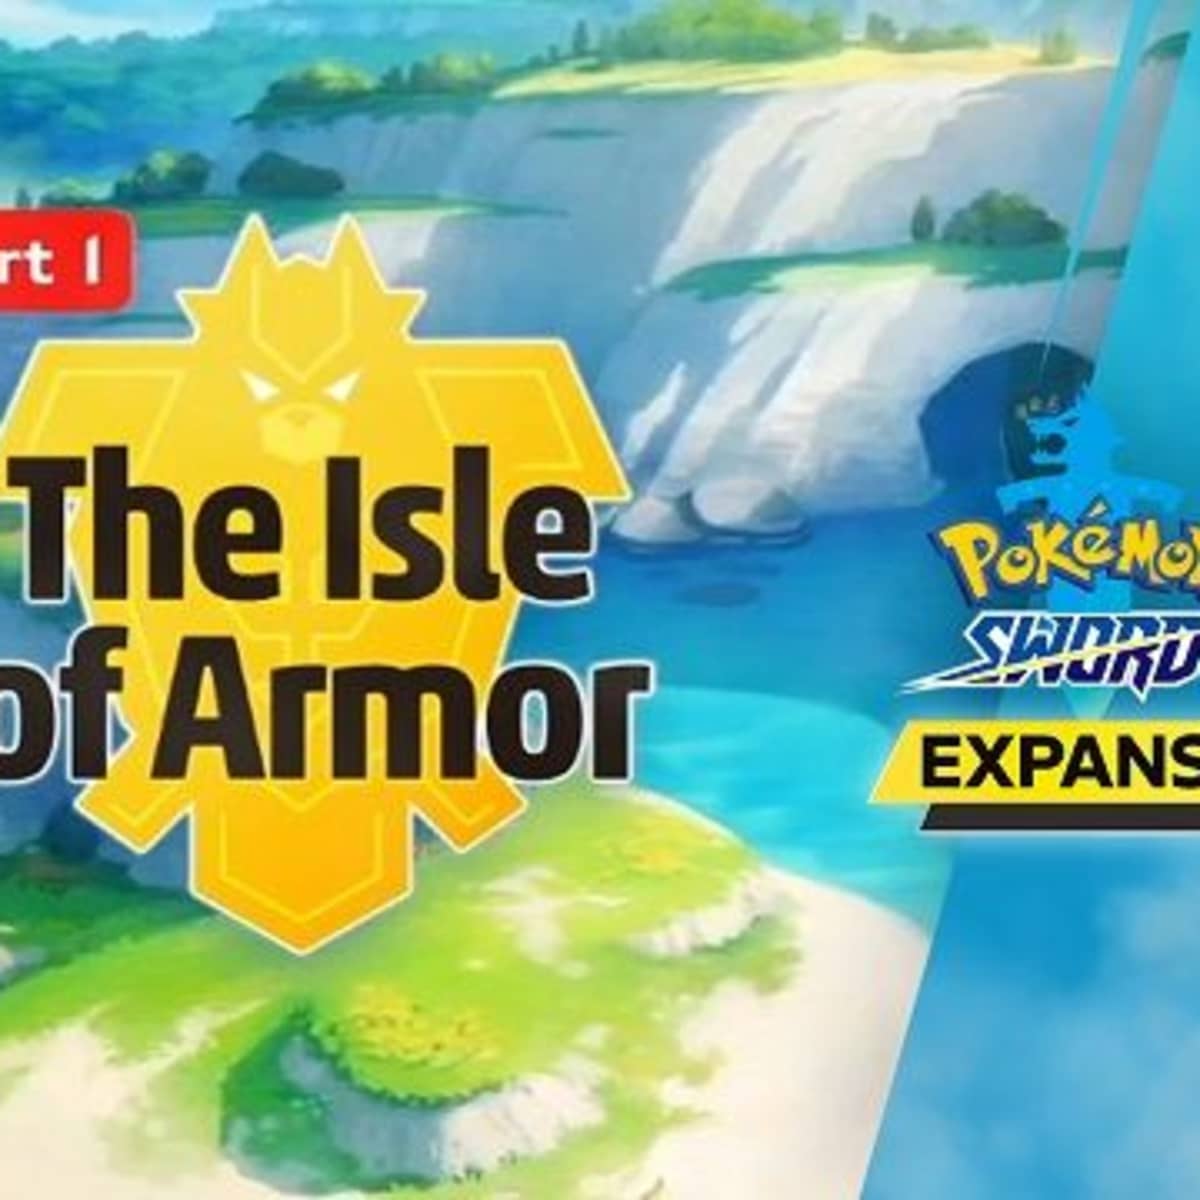 Pokémon 'Isle Of Armor' DLC review: a short but sweet addition to